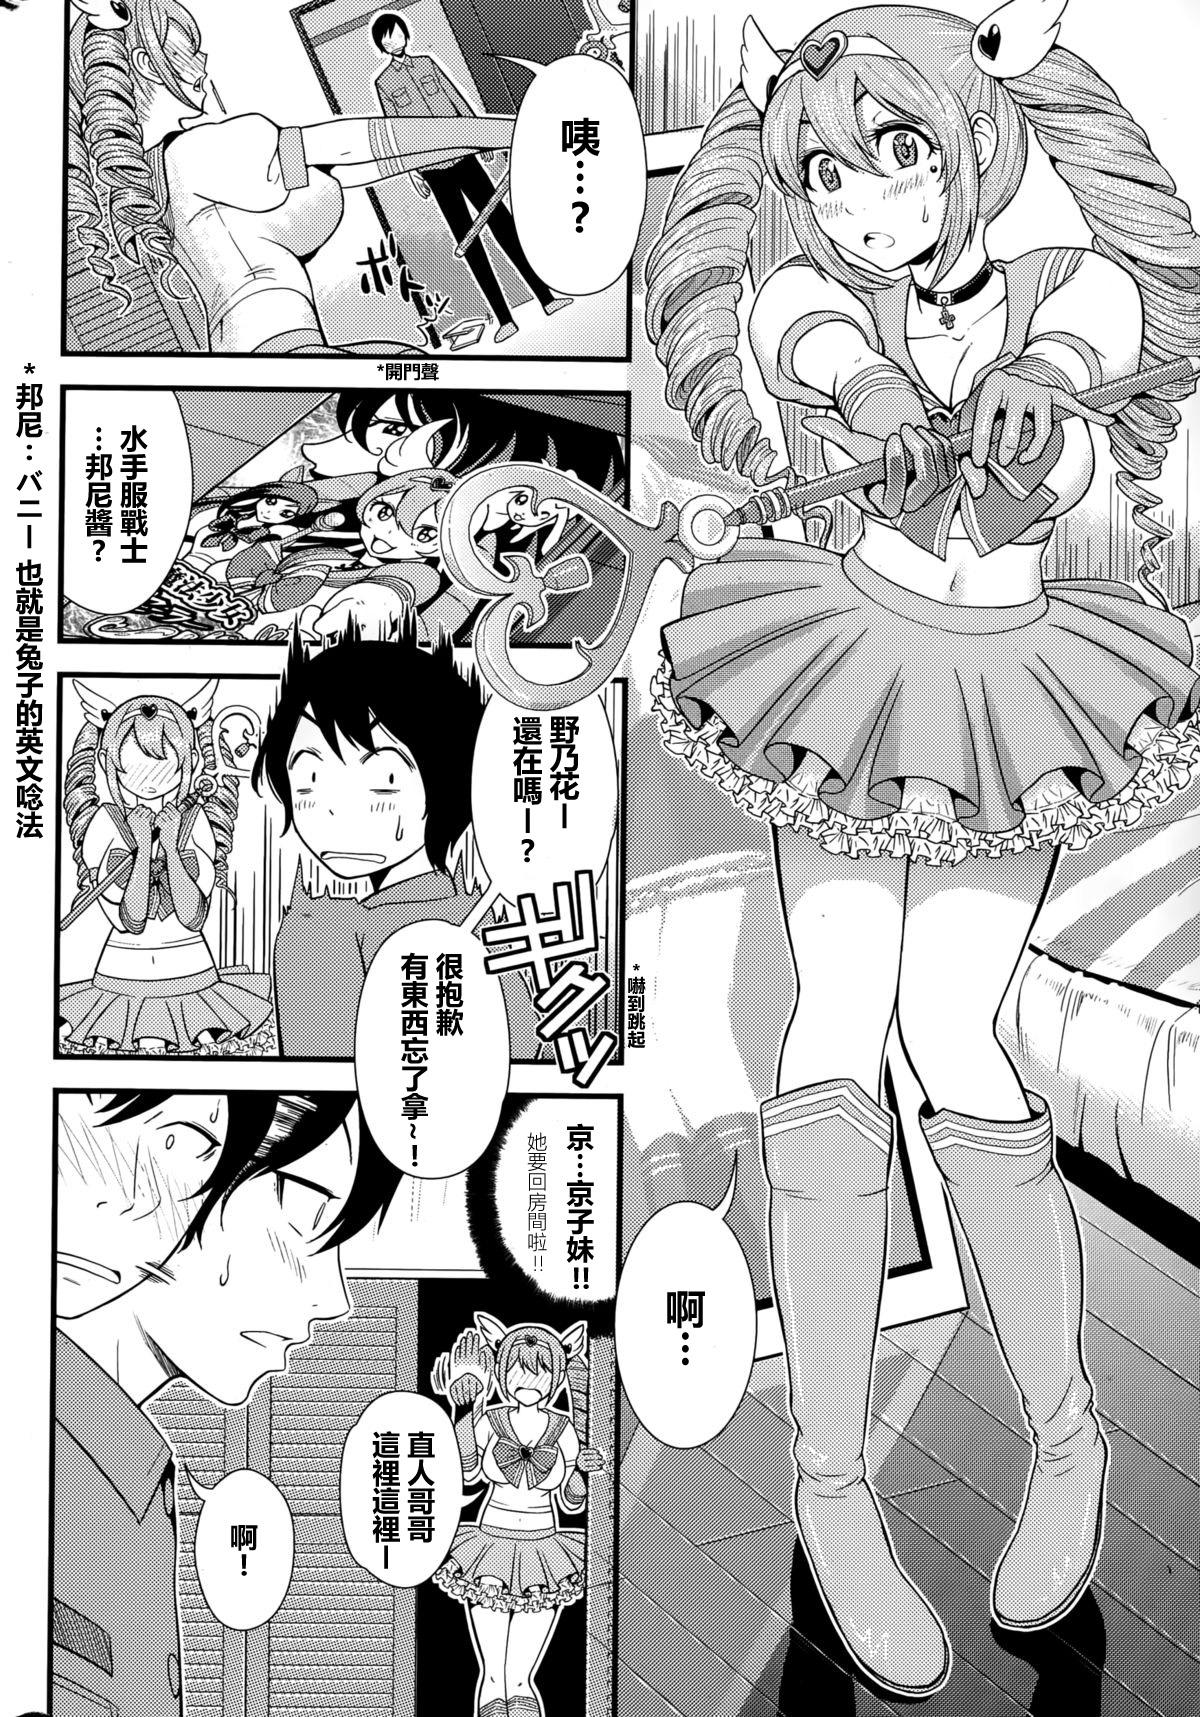 Female order maid Brother Sister - Page 2